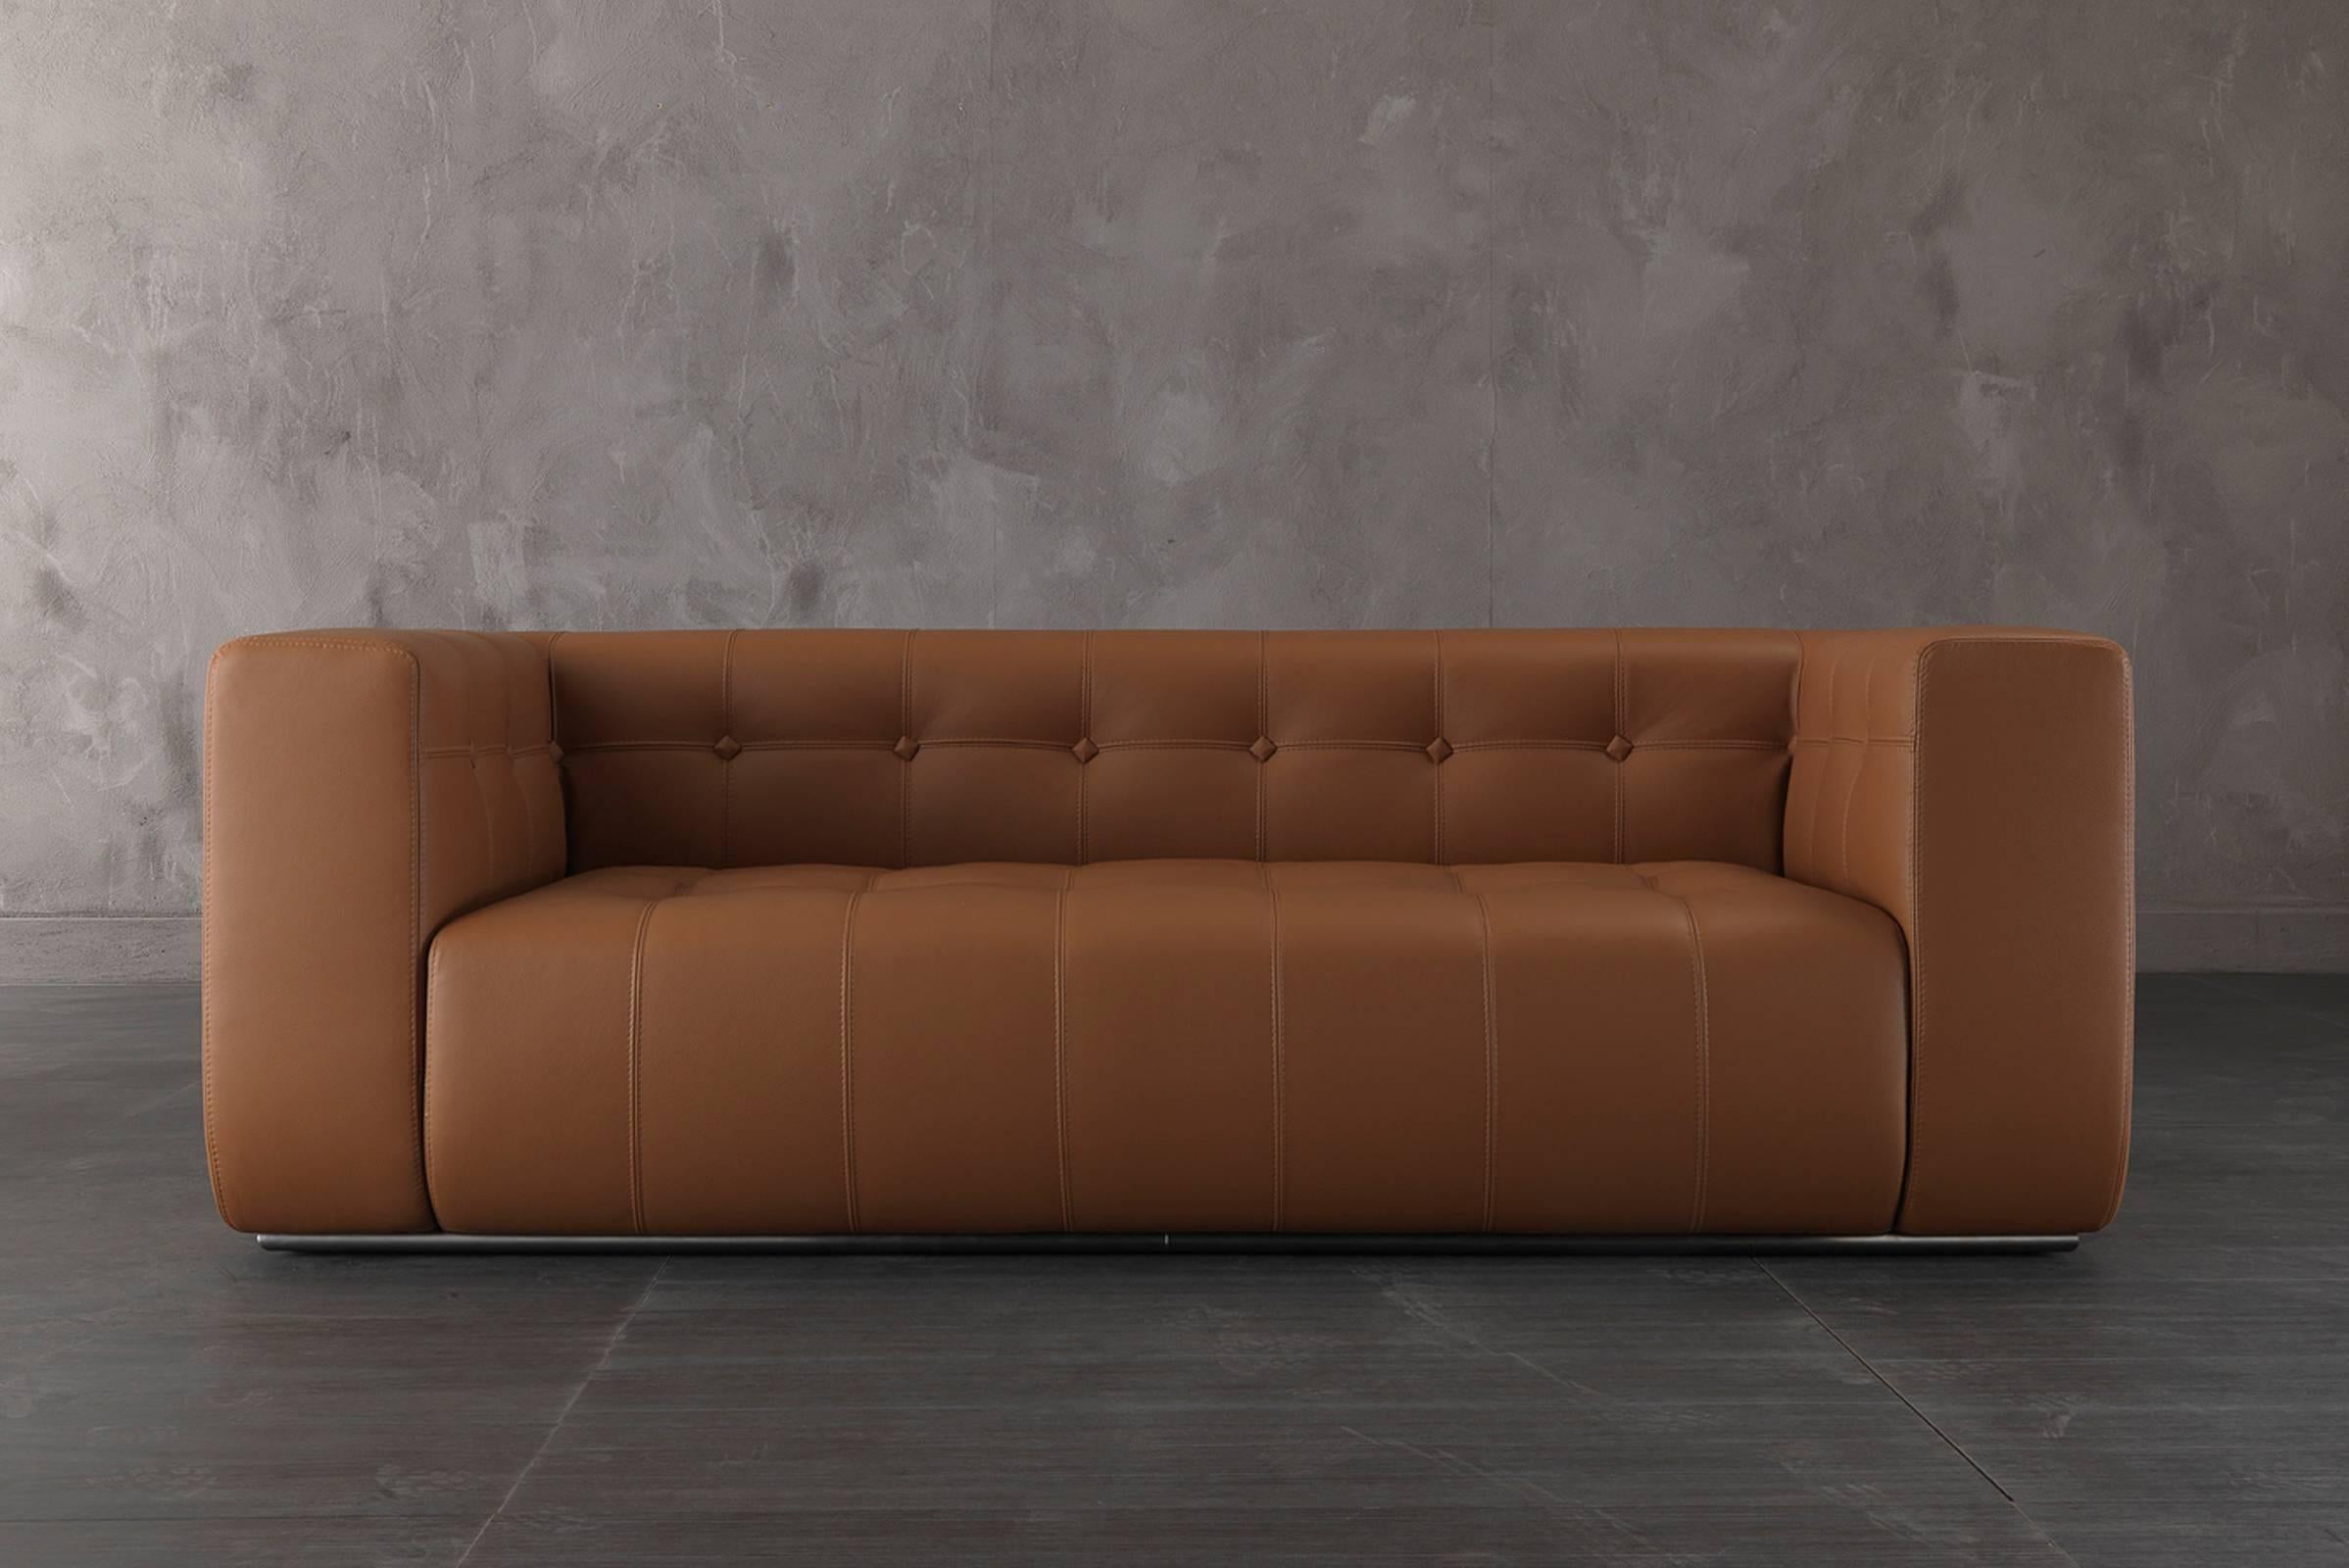 Sofa challenger, two, five seater made with leather category B.
Two back cushions. 60 x 20 included.
Available in leather category C or D
or in fabric category A and B.
Sofa challenger available in modular sofa:
Measures: L 253 cm;

            
   